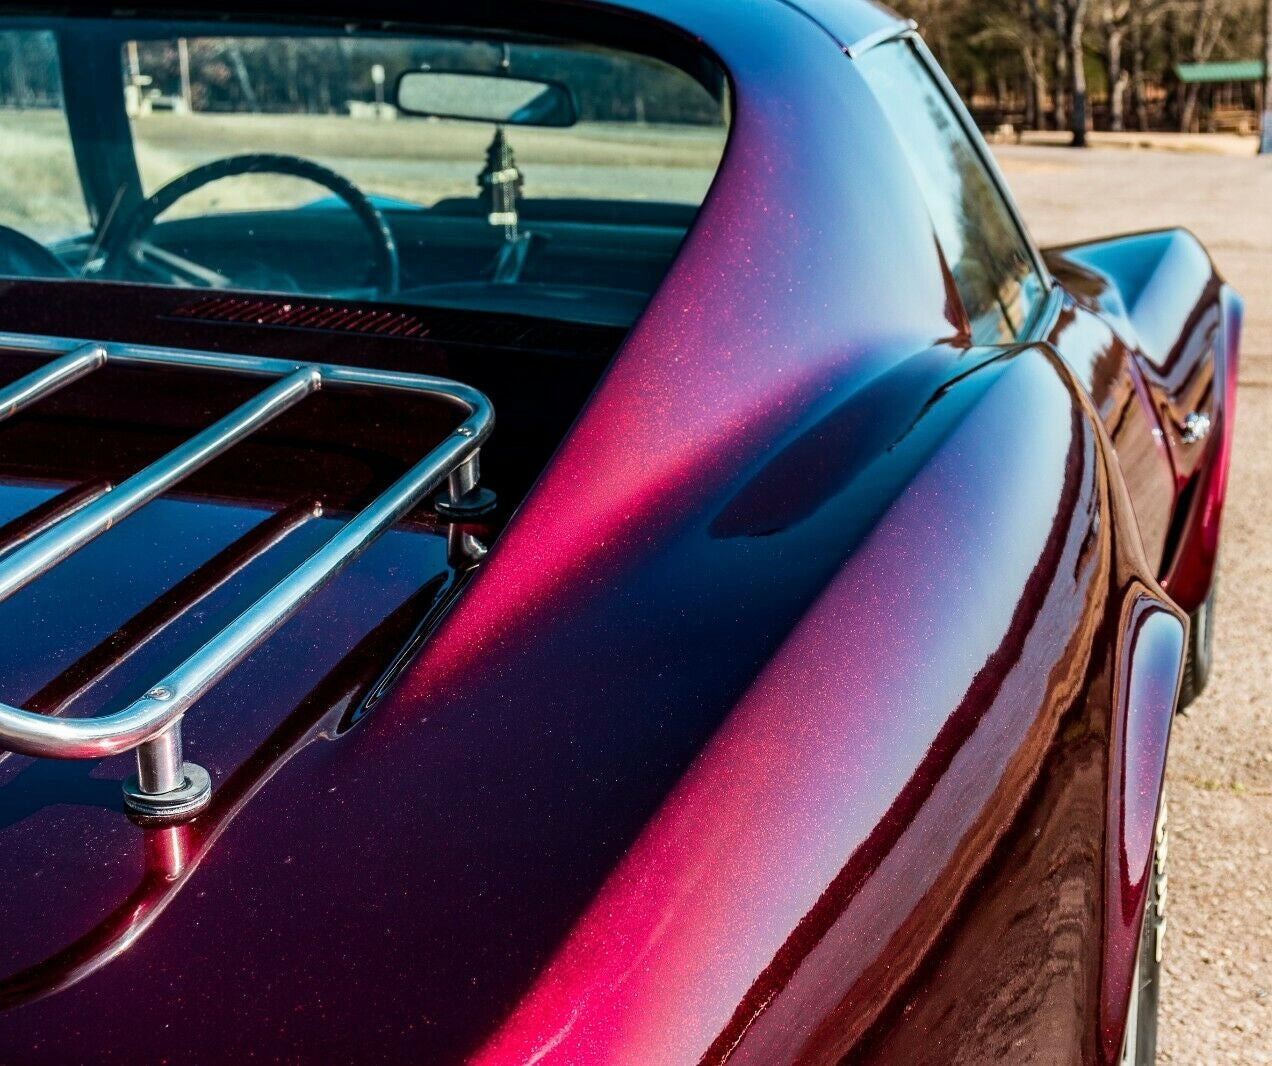 Your Source for High Quality Custom Automotive Paint Products